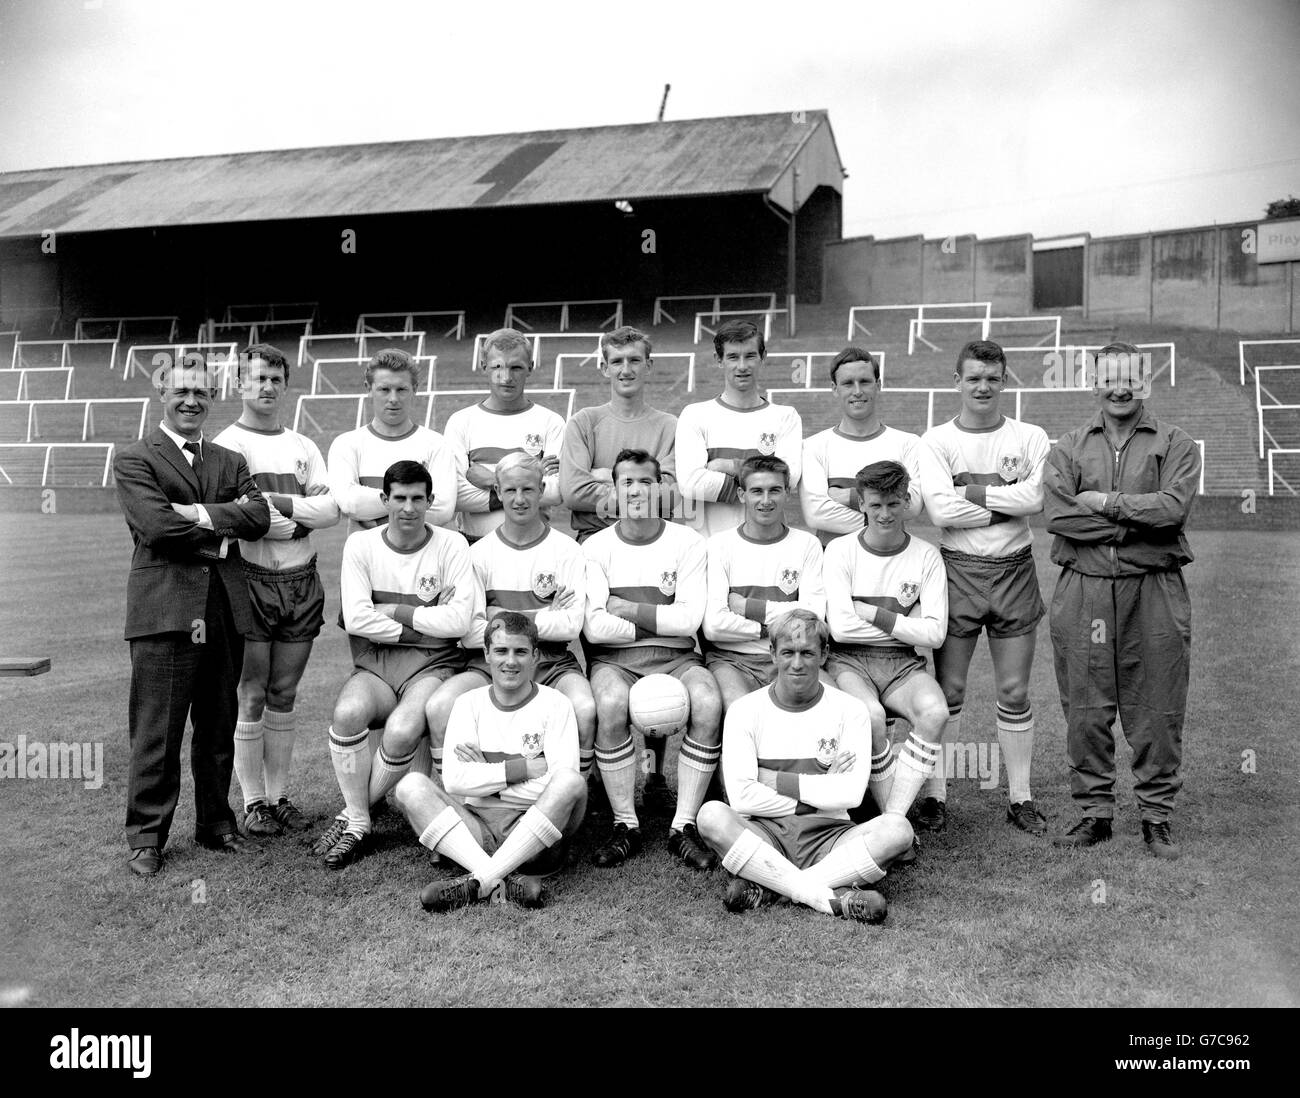 Soccer - League Division Four - Millwall FC Photocall - 1965 - The Den Stock Photo